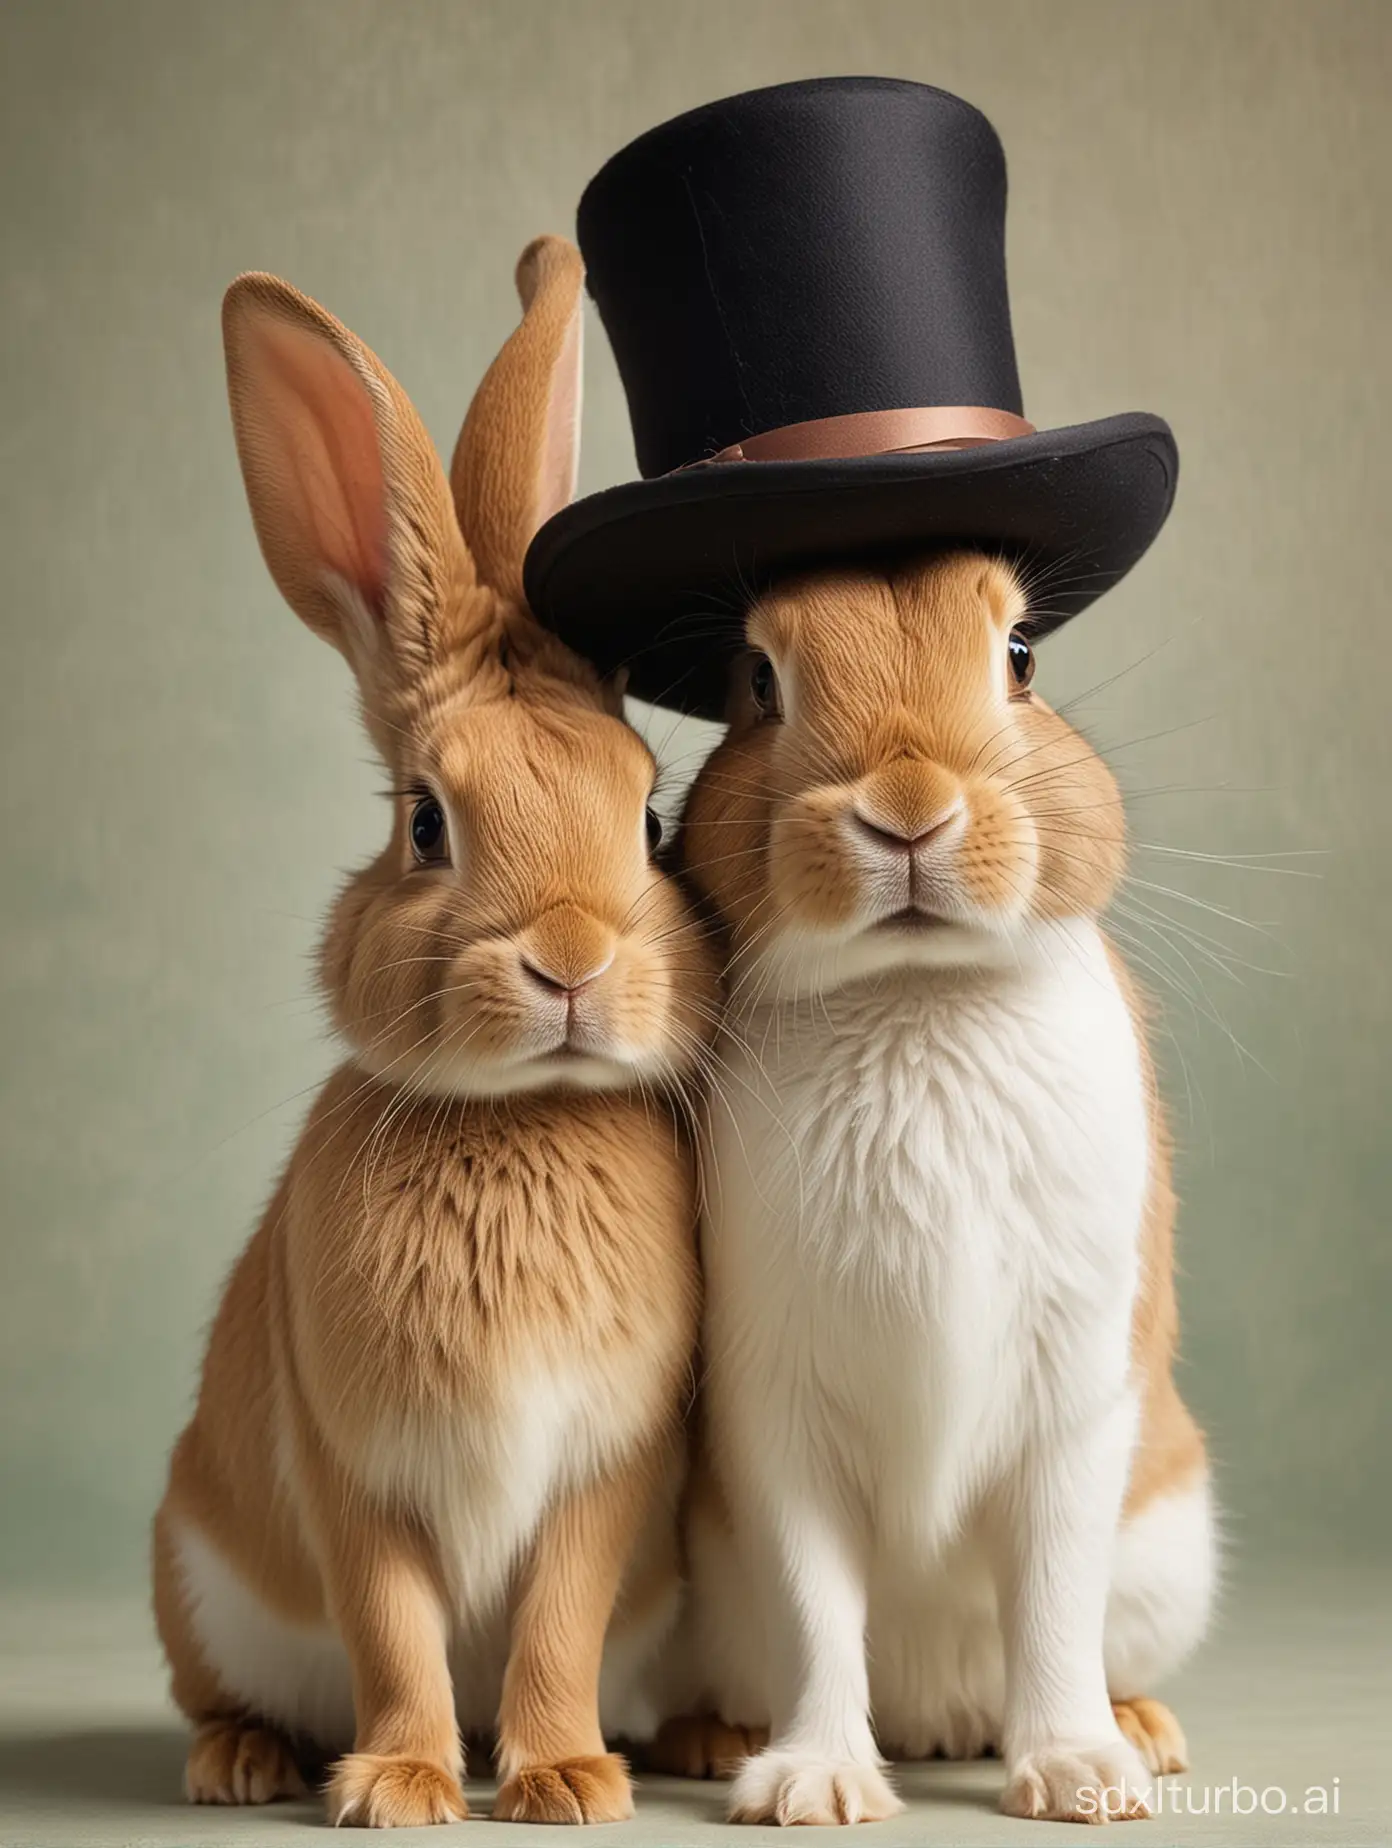 a rabbit with  2 hats